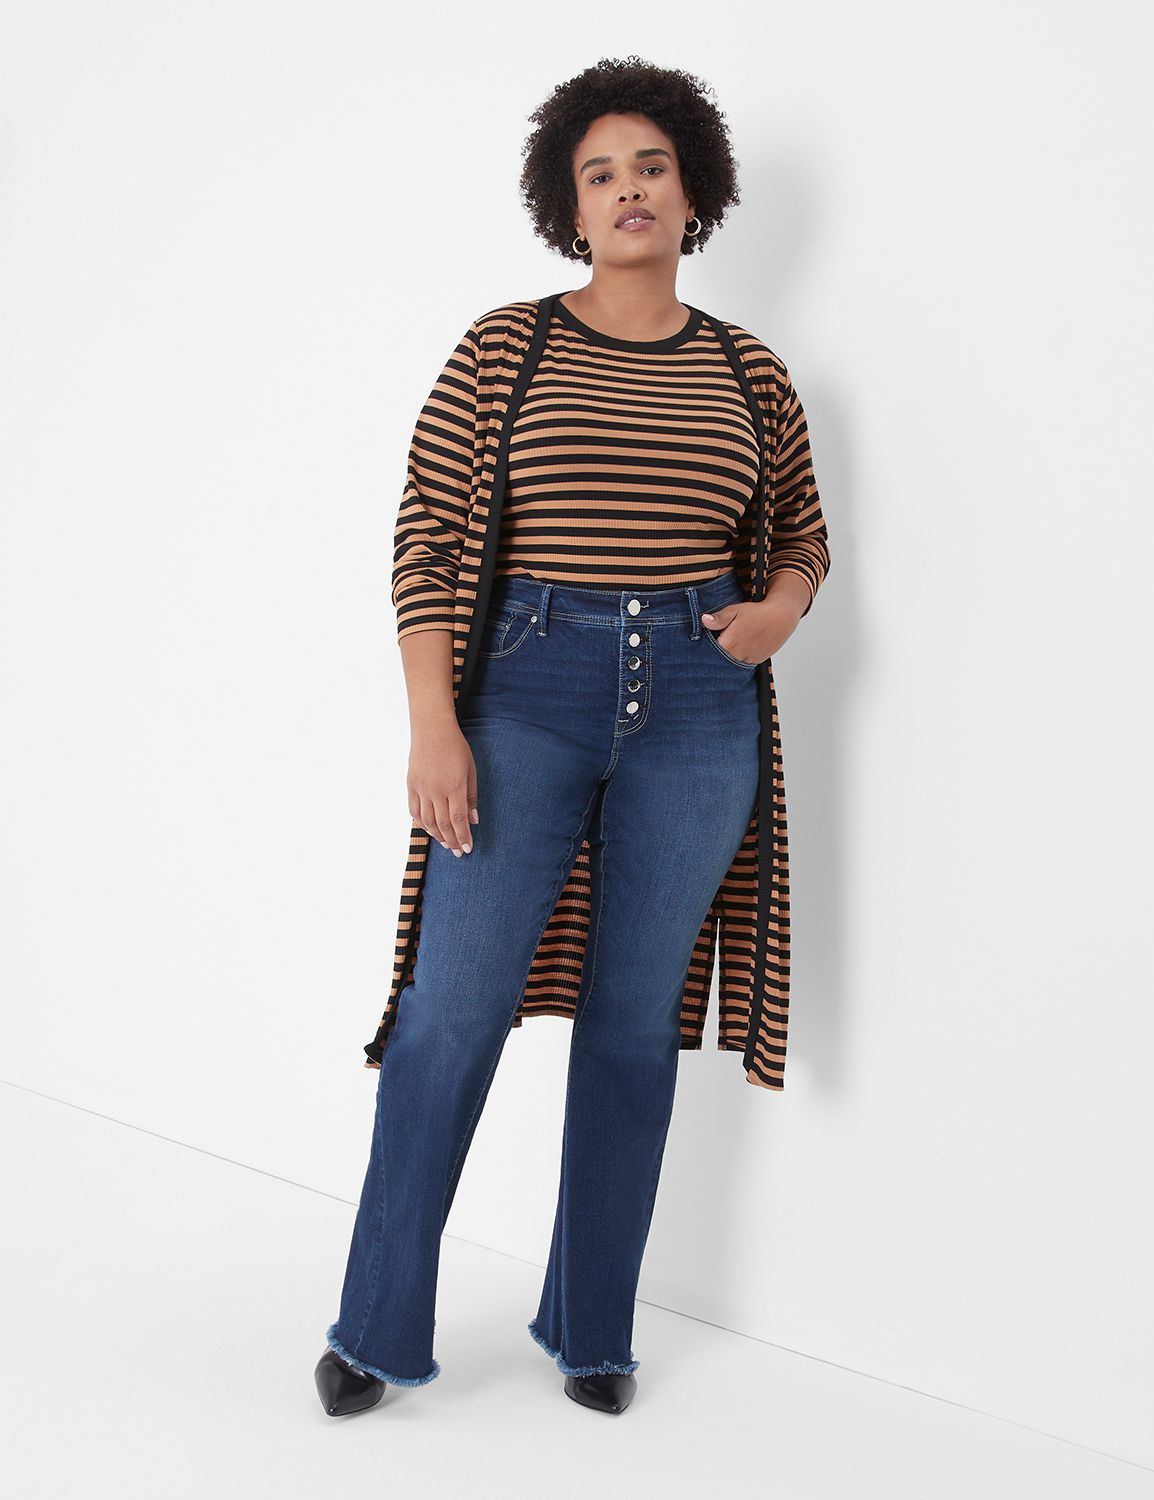 Womens Plus Flare Jeans at Seven7 Jeans